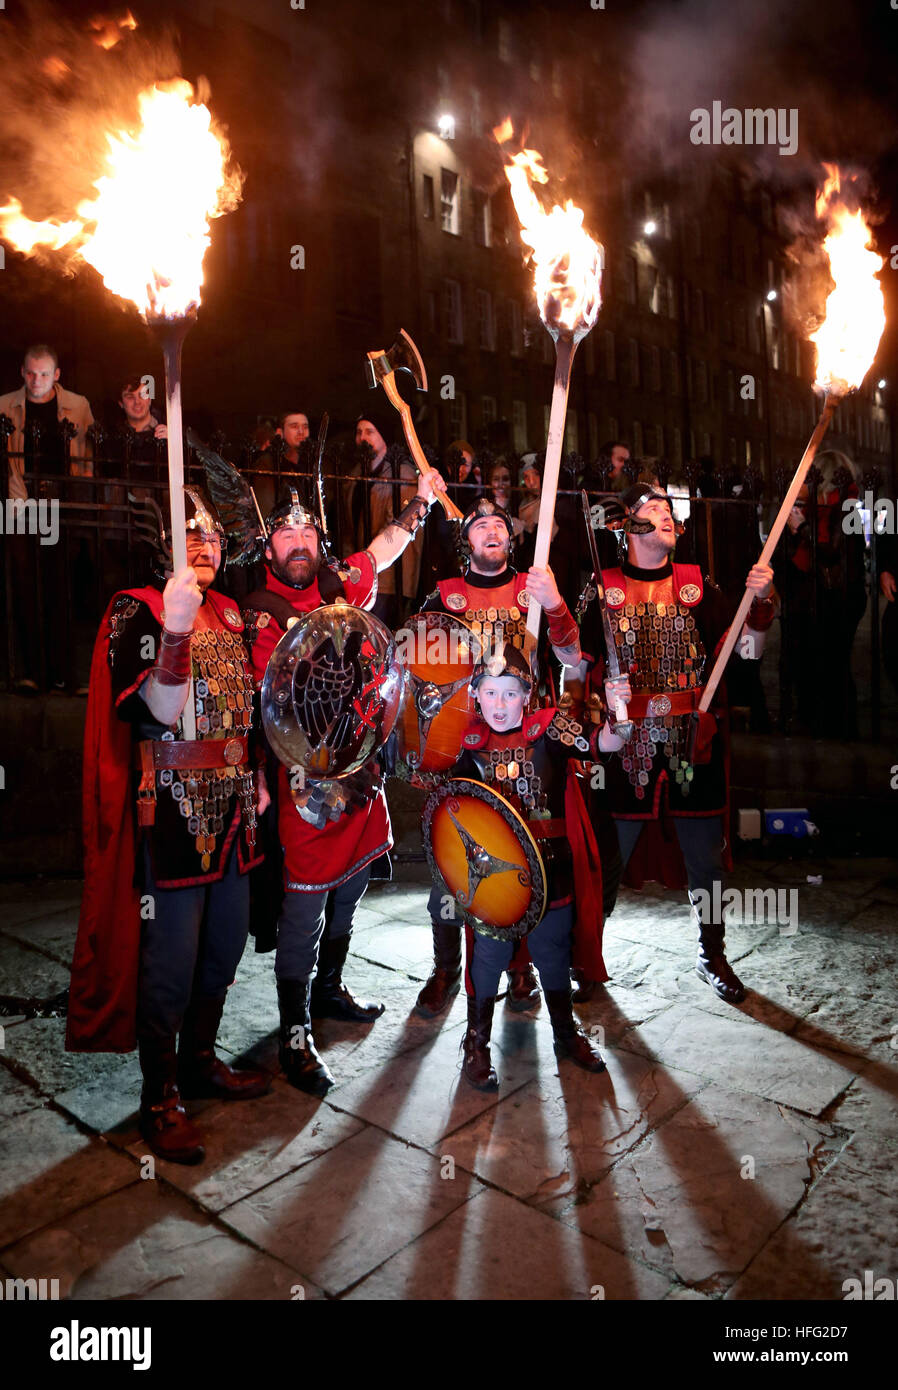 The opening event of Edinburghs Hogmanay celebrations begins with the annual Torchlight Procession, as thousands of torch carriers led by Shetlands Up Helly Aa Vikings (pictured) and the massed pipes and drums march through the city centre to a spectacular fireworks finale ahead of the Hogmanay celebrations for the New Year. Stock Photo